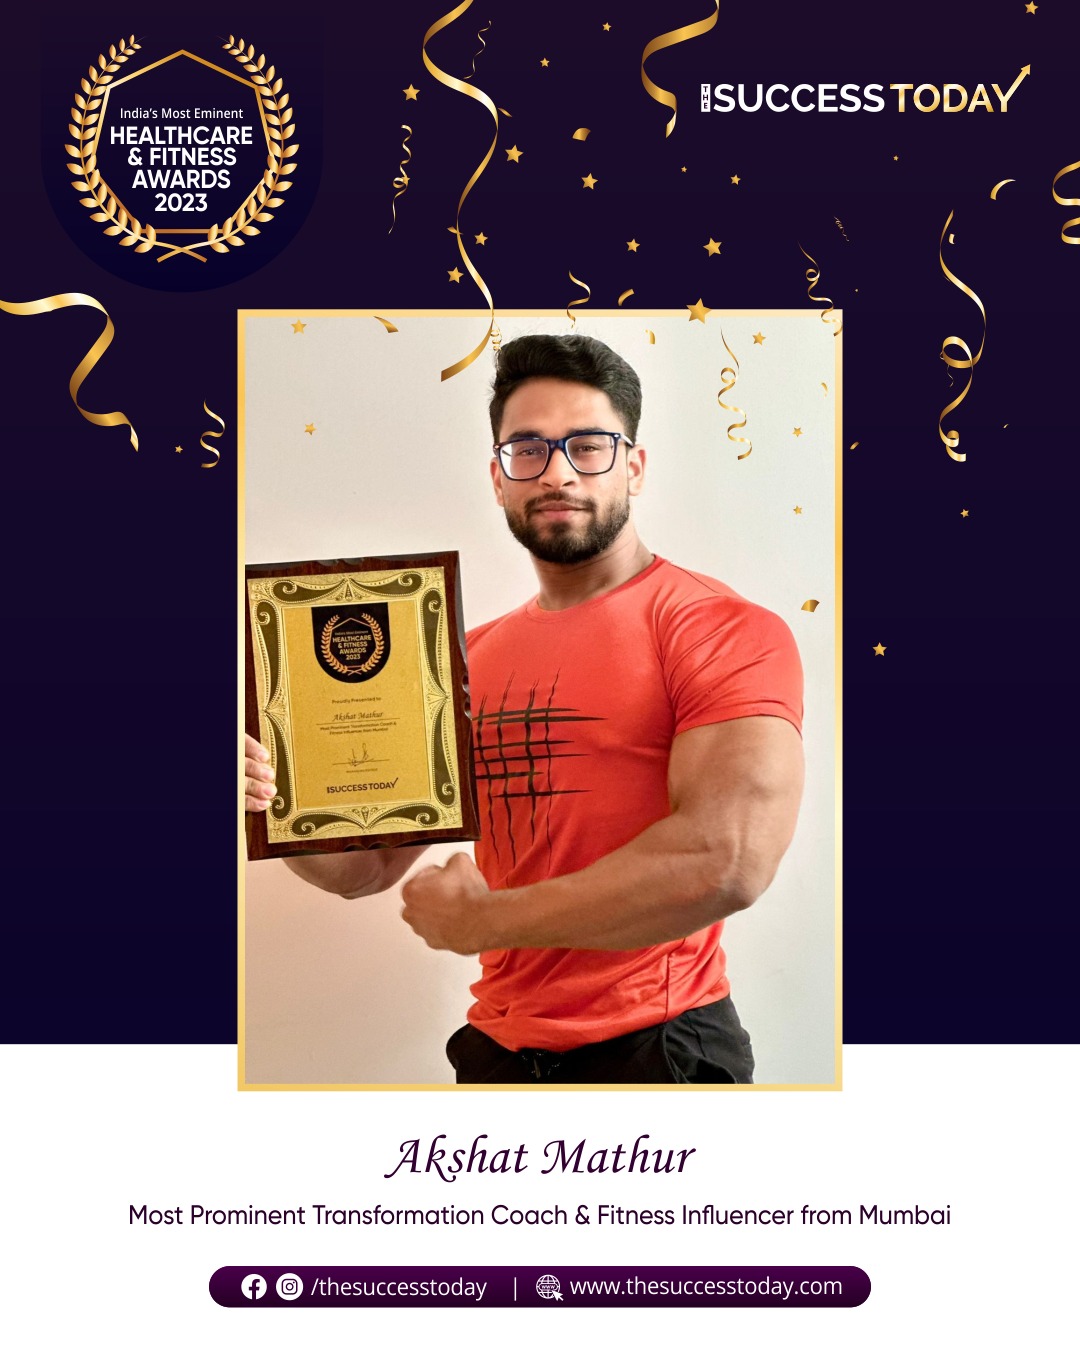 Akshat Mathur - Transformation Coach & Fitness Influencer - The Success Today - Success Today - thesuccesstoday